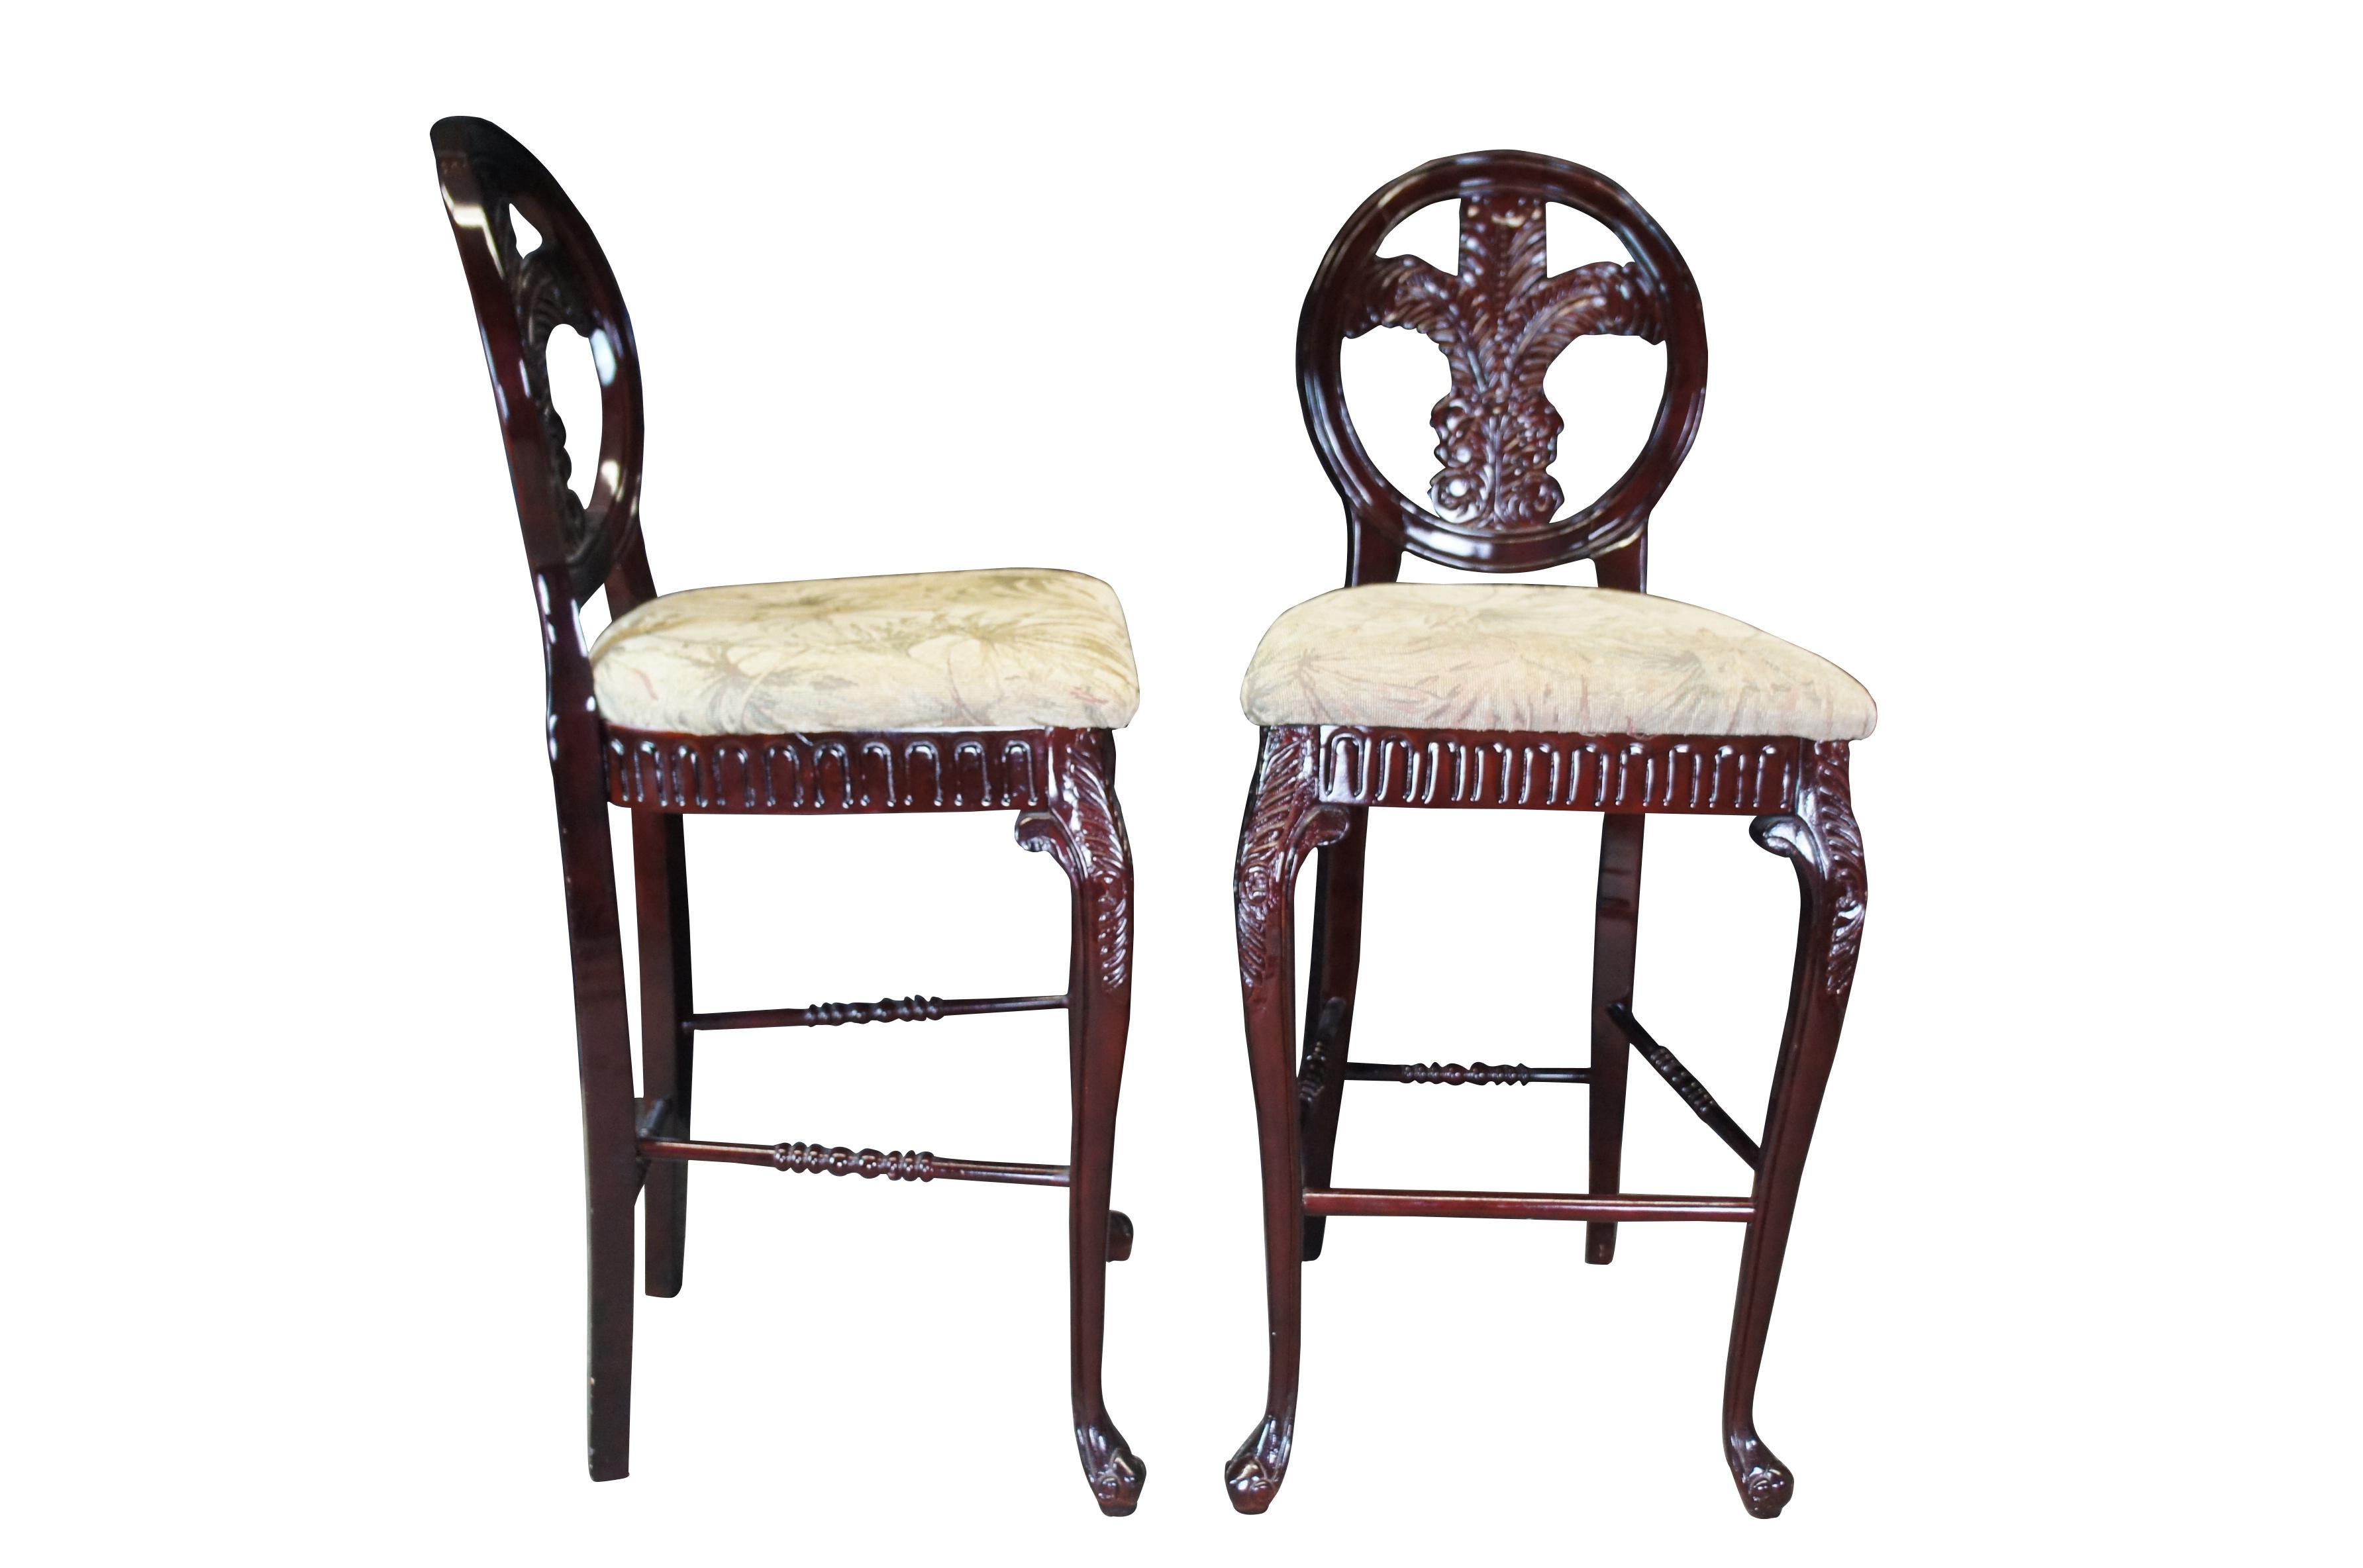 The Pulaski Foxcroft Bar Stool has an elegantly carved back showcasing Prince of Wales feathers and acanthus carved legs as well as a lovely and classic upholstered seat. Finished in mahogany

Dimensions:
22